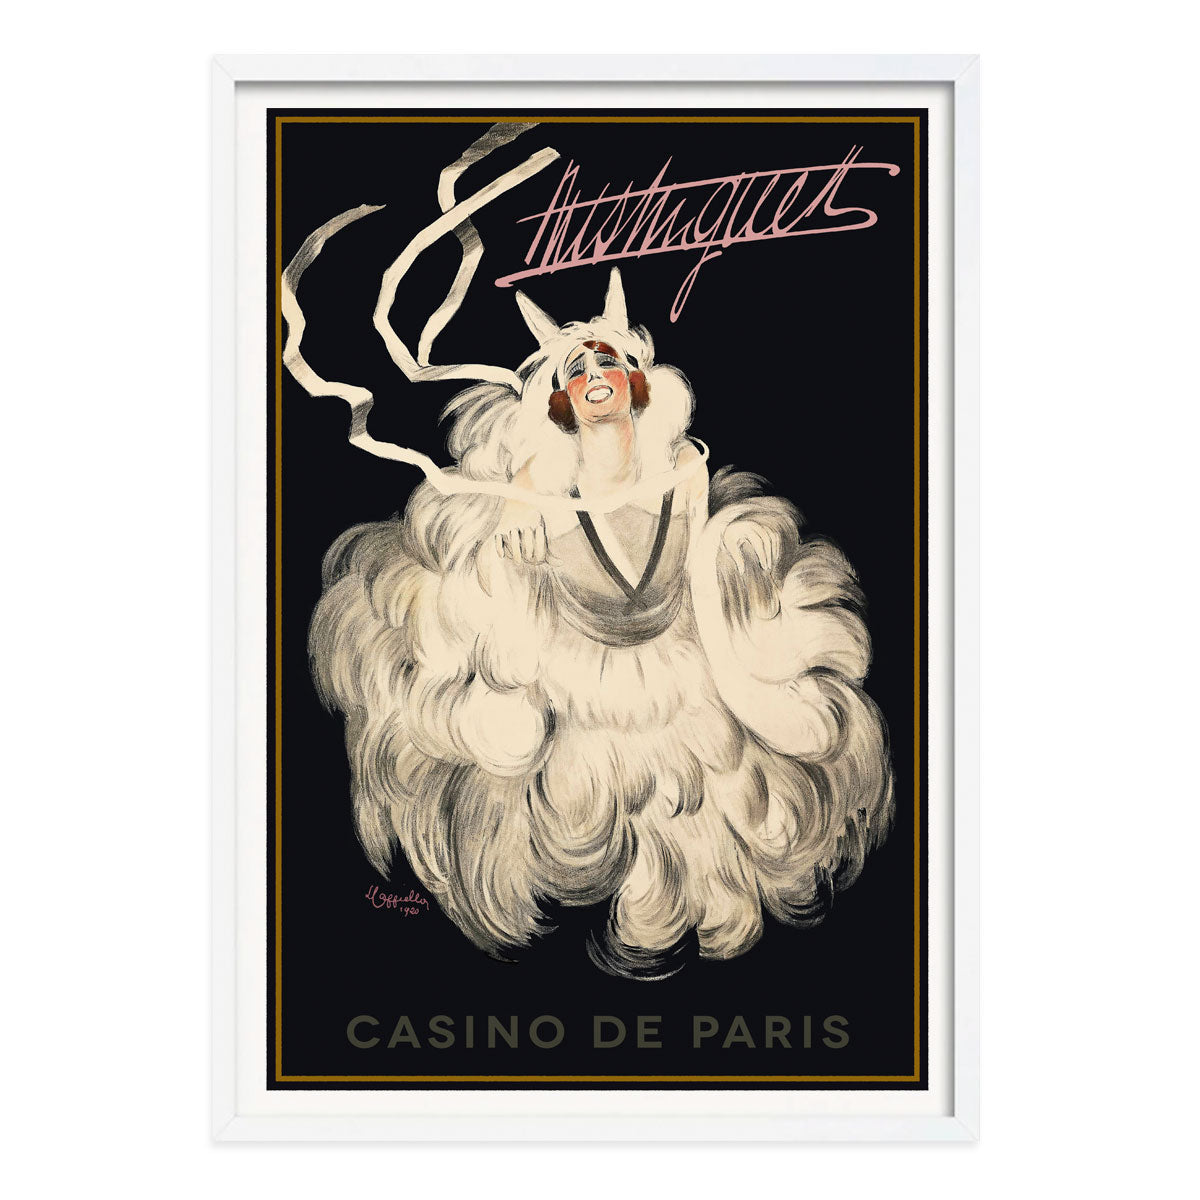 Casino de Paris retro vintage advertising poster print in white frame from Places We Luv